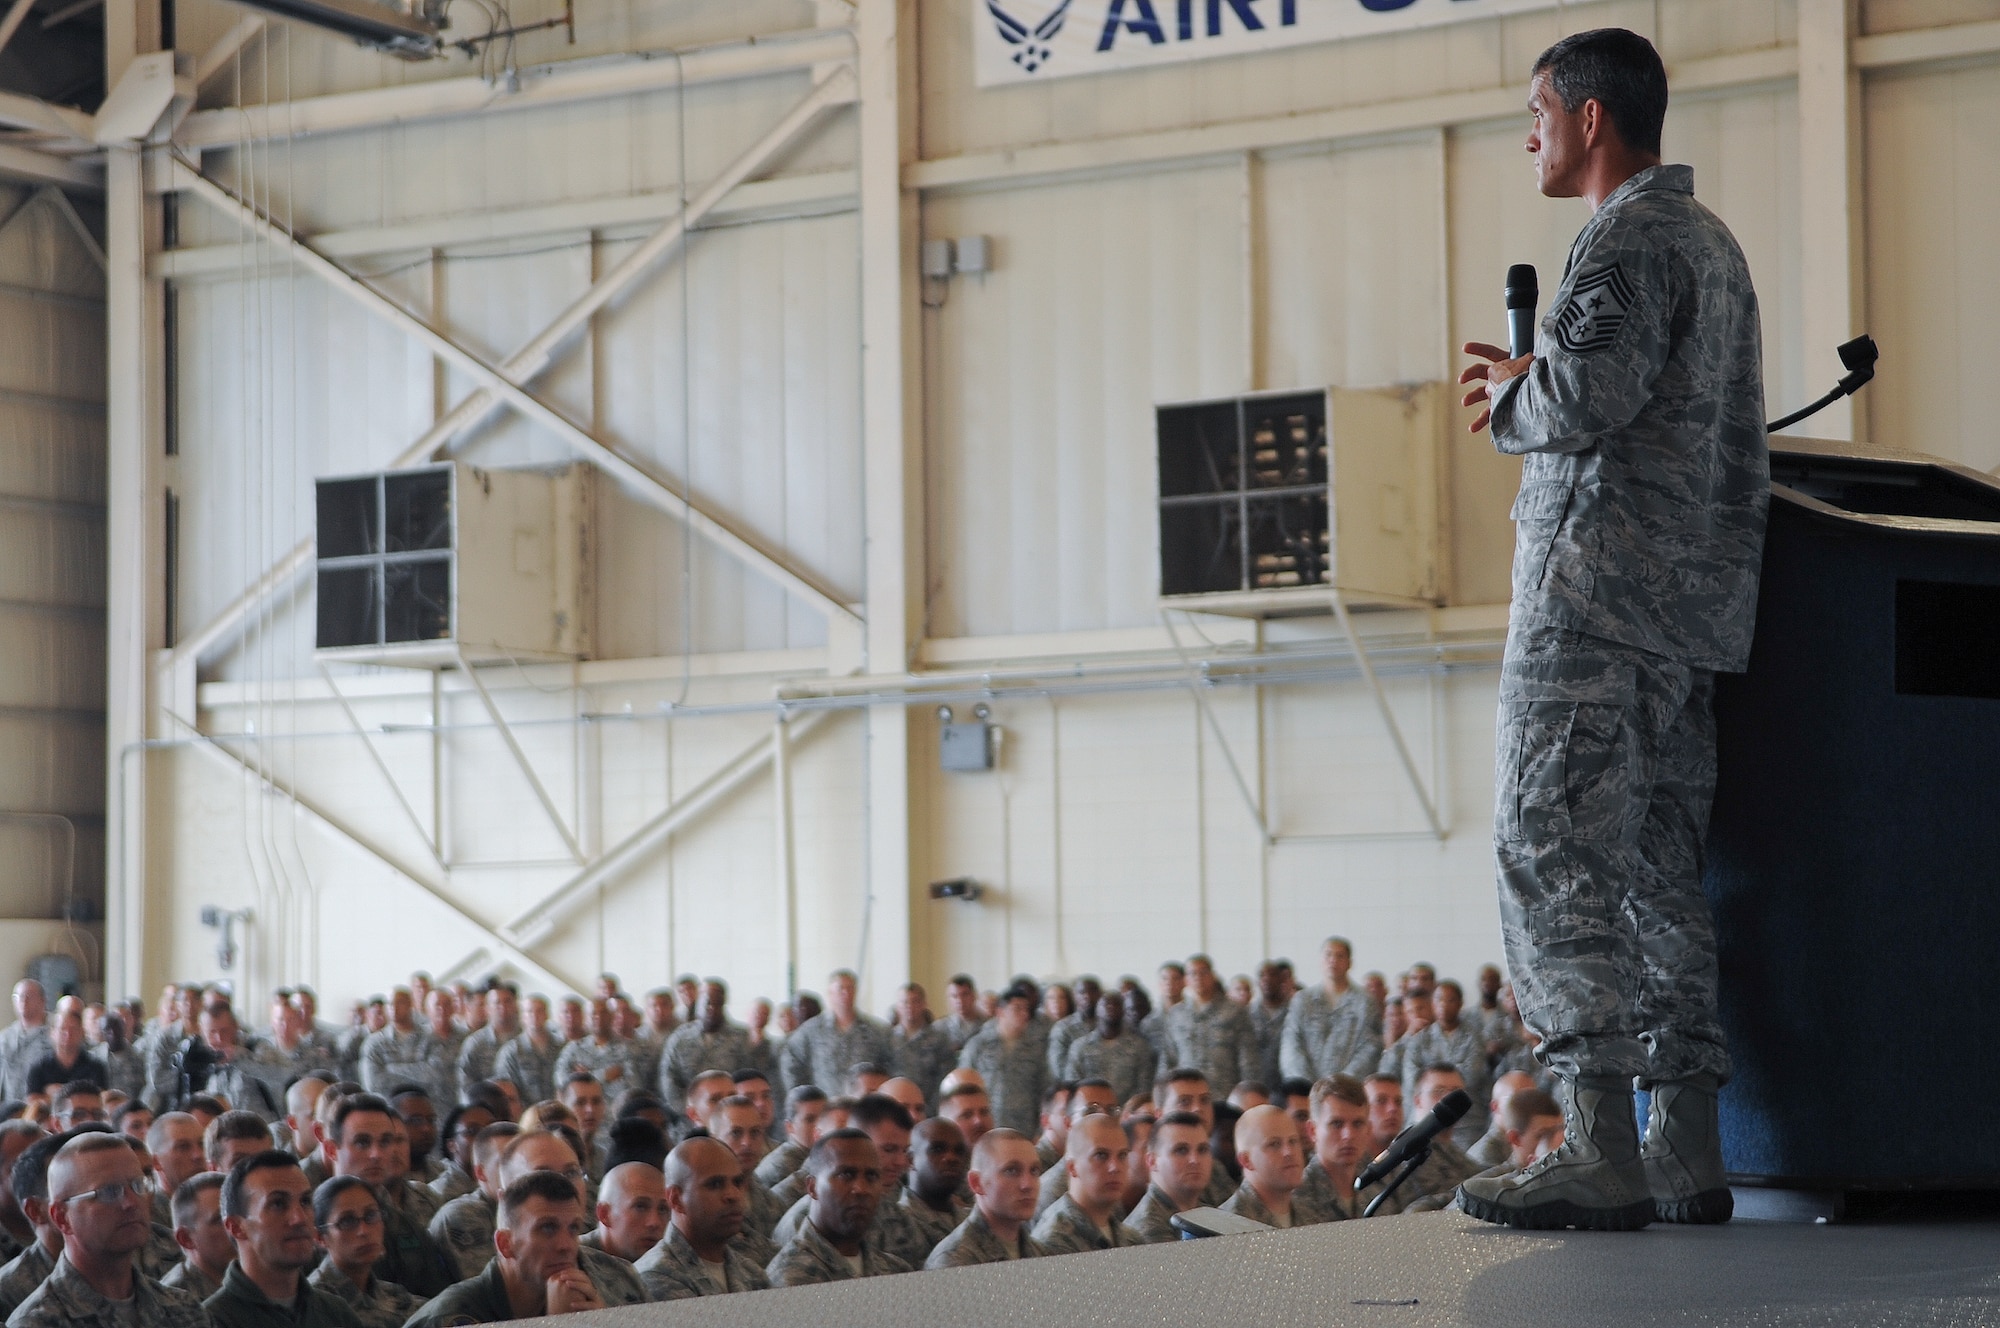 U.S. Air Force Chief Master Sgt. Rick Parsons, command chief of Air Combat Command, addresses Airmen at Moody Air Force Base, Ga., during an all-call Aug. 2, 2012. Parsons was the command chief of the 23d Wing from June 2009 to December 2010. (U.S. Air Force photo by Airman 1st Class Olivia Dominique/Released)